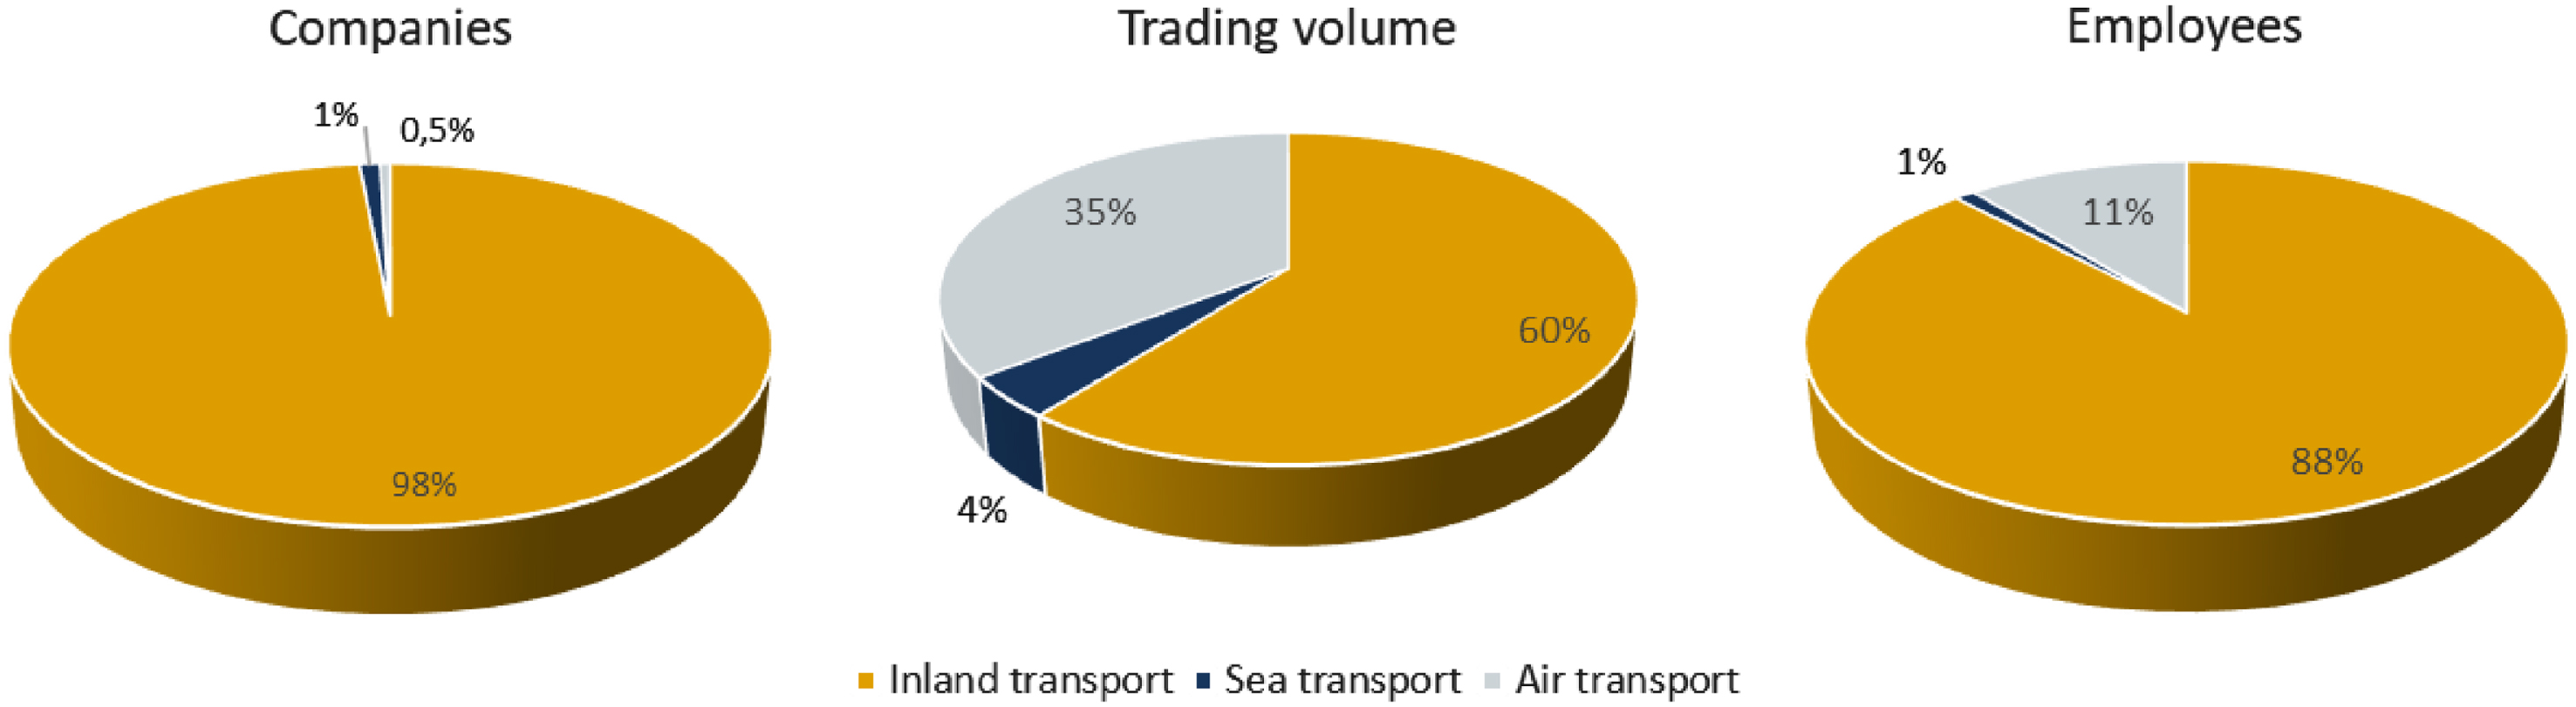 Portuguese transport sector by segments of economic activity – Number of companies, trading volume and number of employees. Data source: Banco de Portugal, 2017.